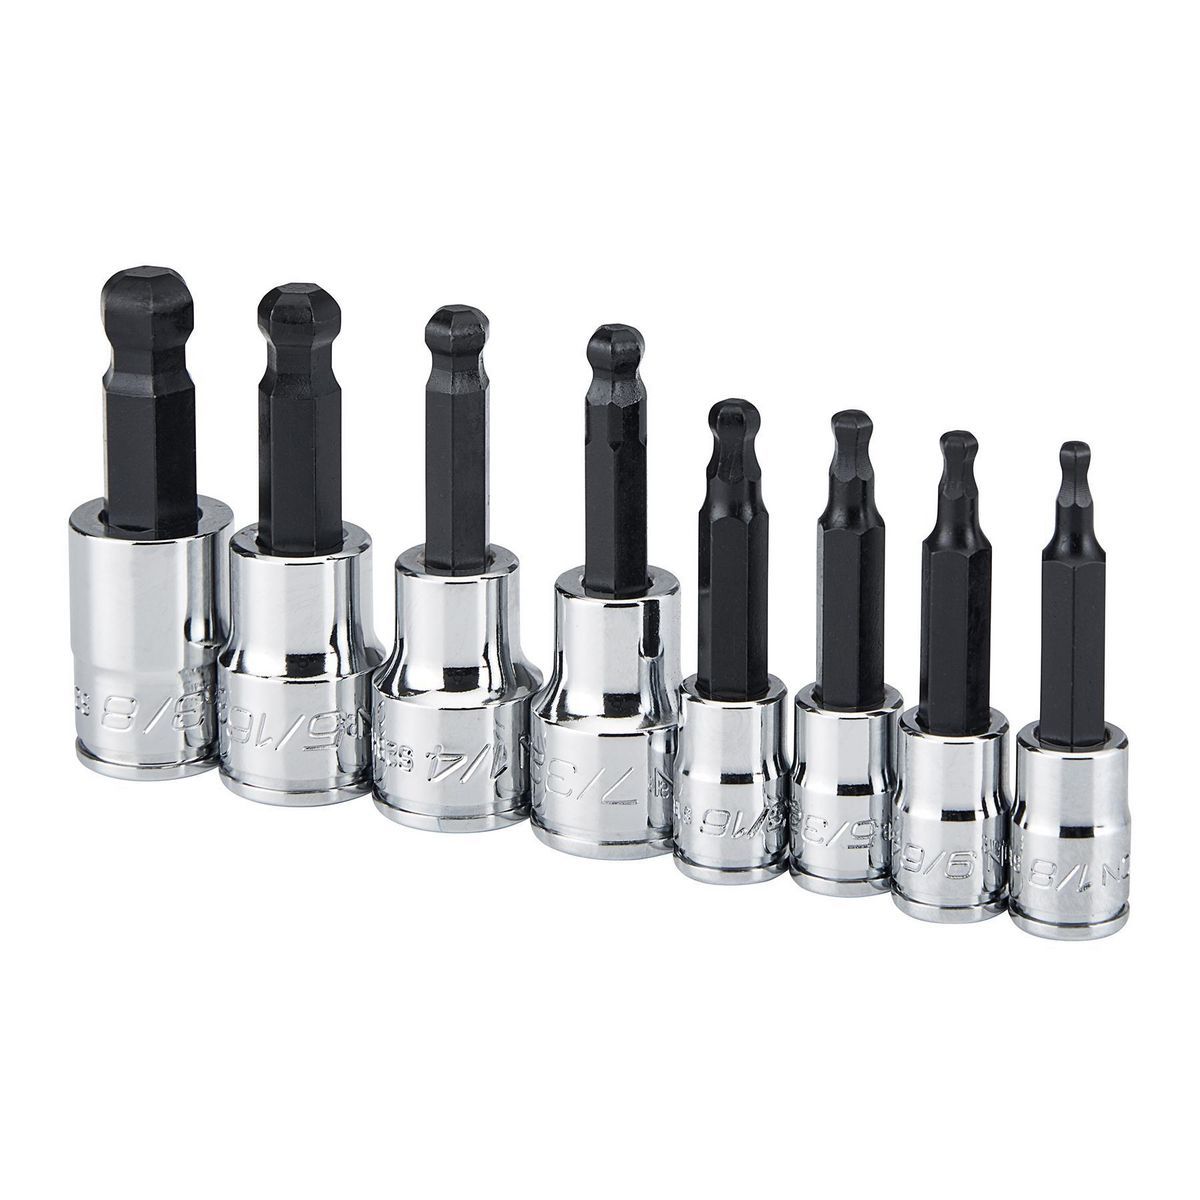 ICON 1/4 in. and 3/8 in. Drive SAE Professional Ball Hex Socket Set, 8 Piece